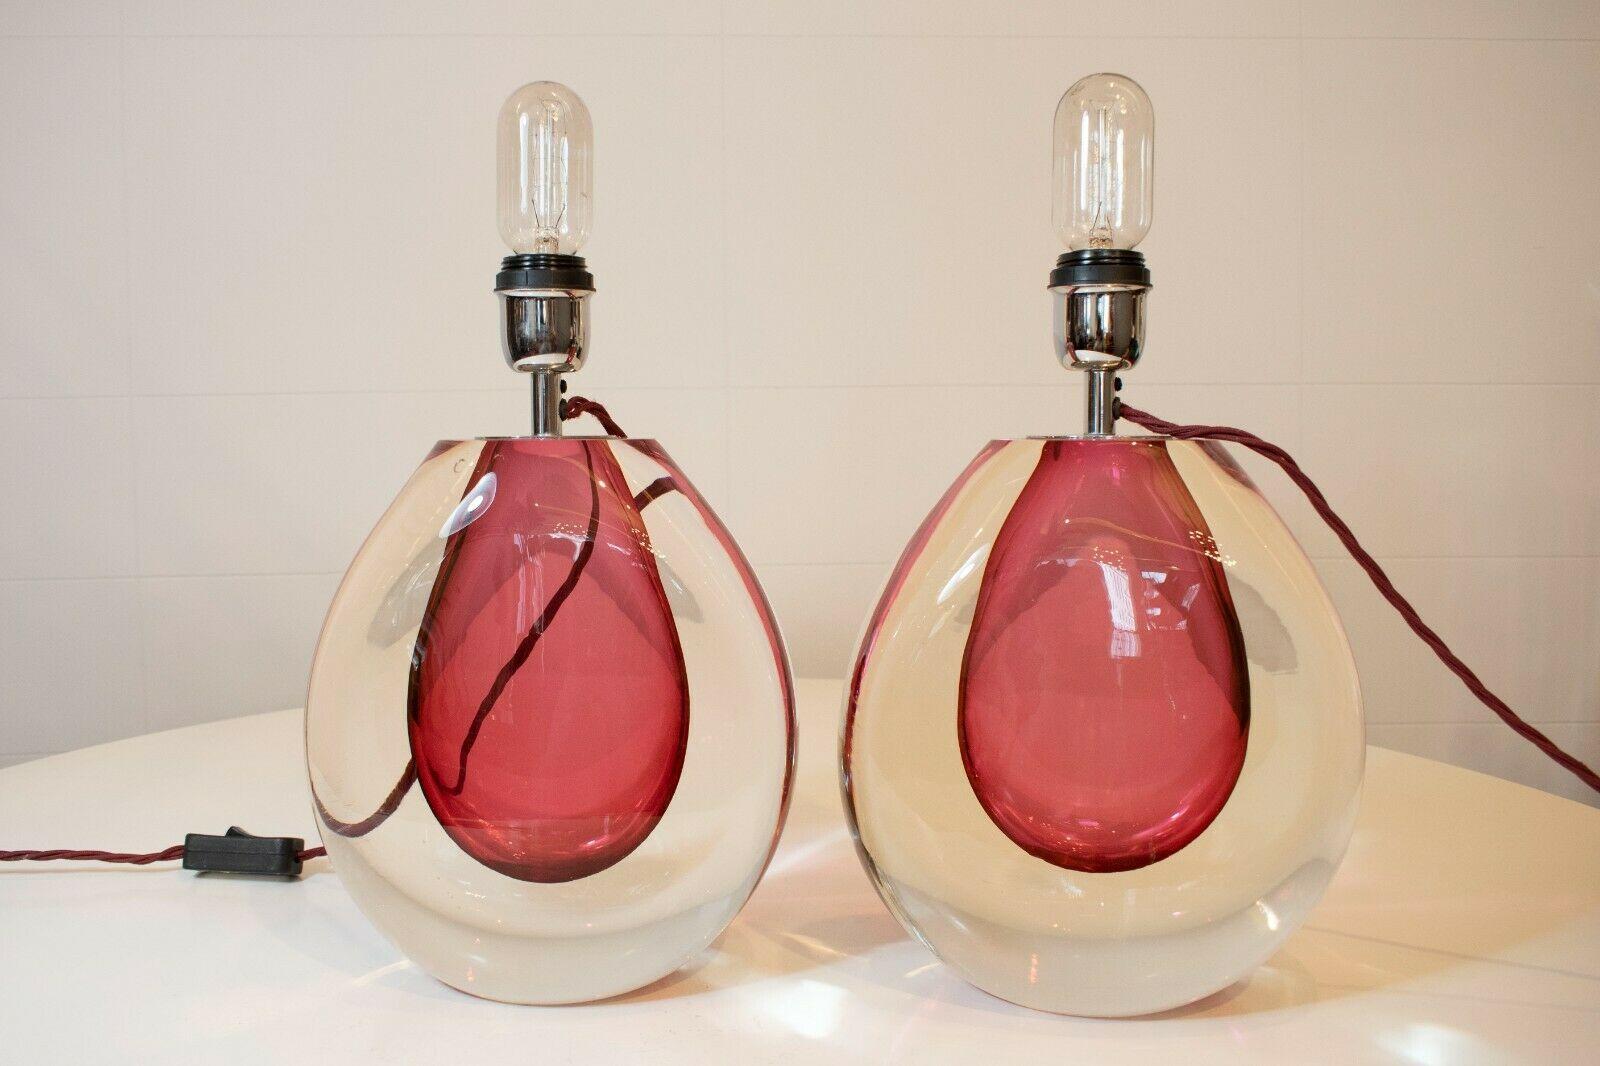 A beautiful pair of 1970s Italian Murano glass lamps with pink centre and clear glass.